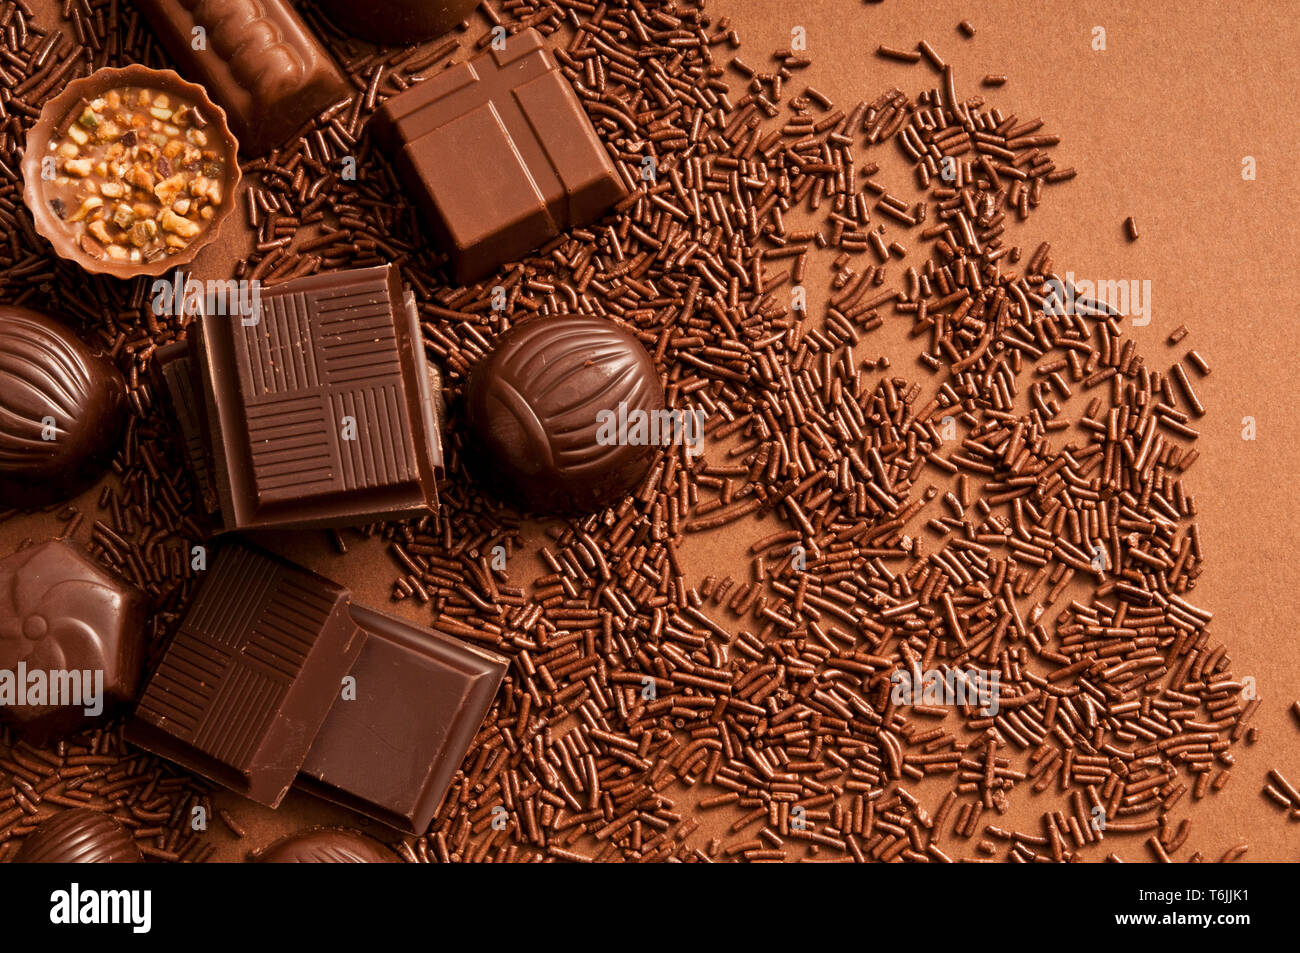 variety of chocolate bonbons and pralines Stock Photo